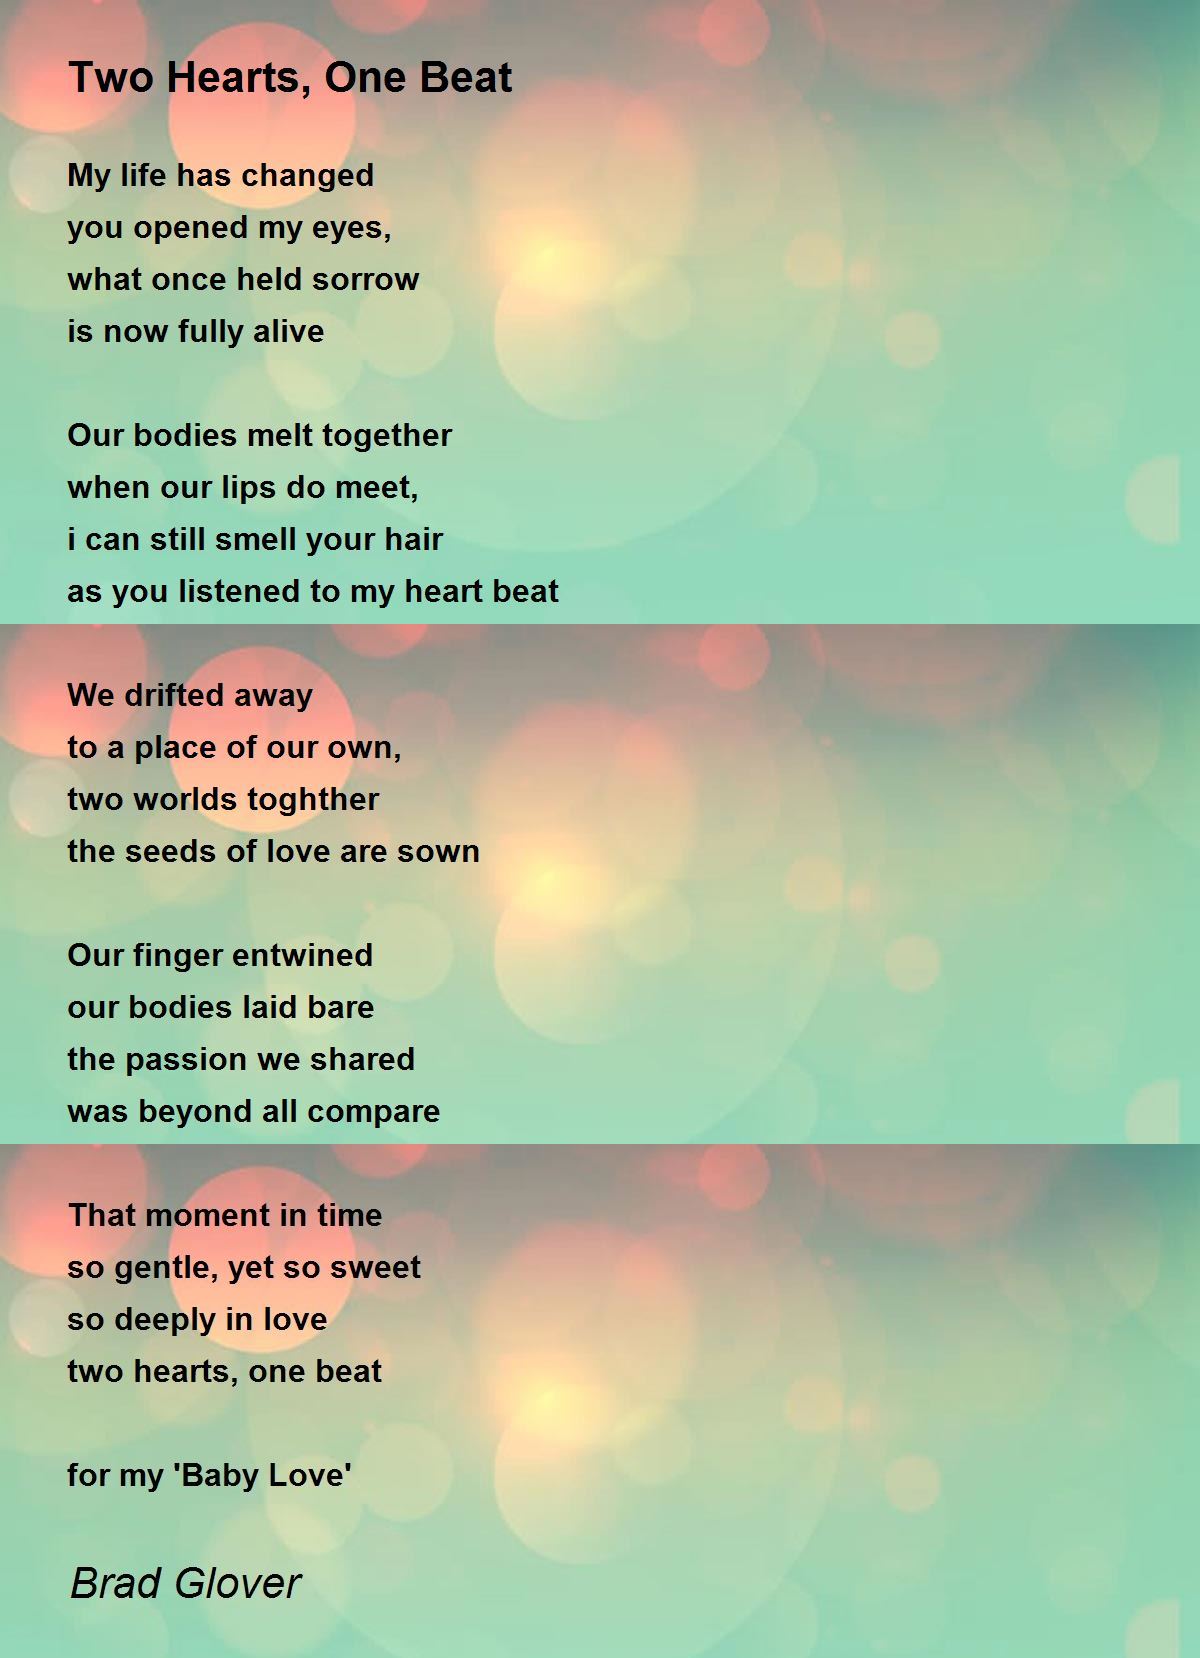 Two - Two One Beat Poem by Brad Glover